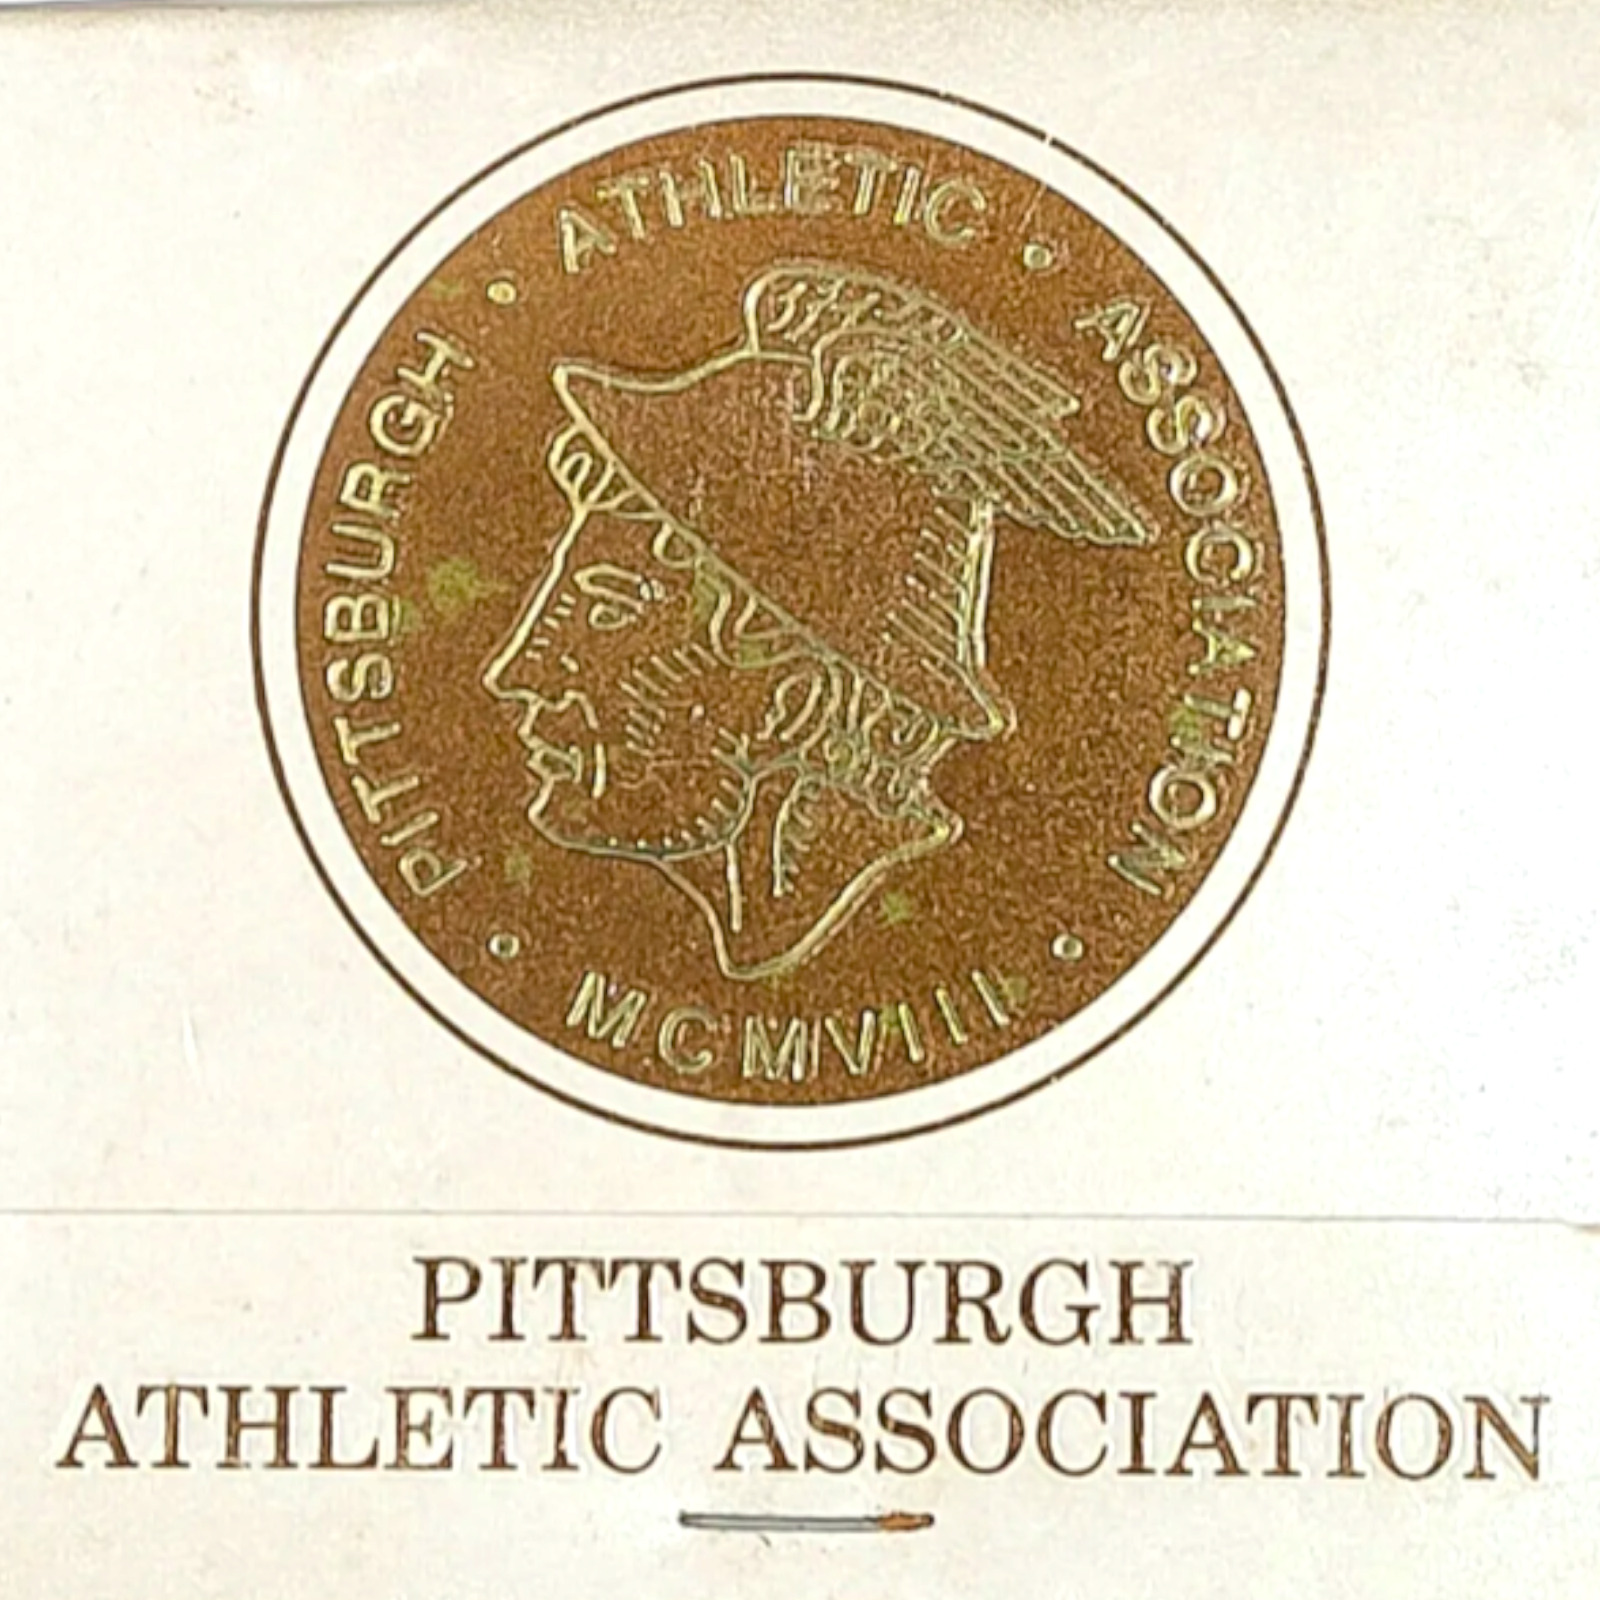 Pittsburgh PA Athletic Association Matchbook Cover Vintage 1960s Advertising